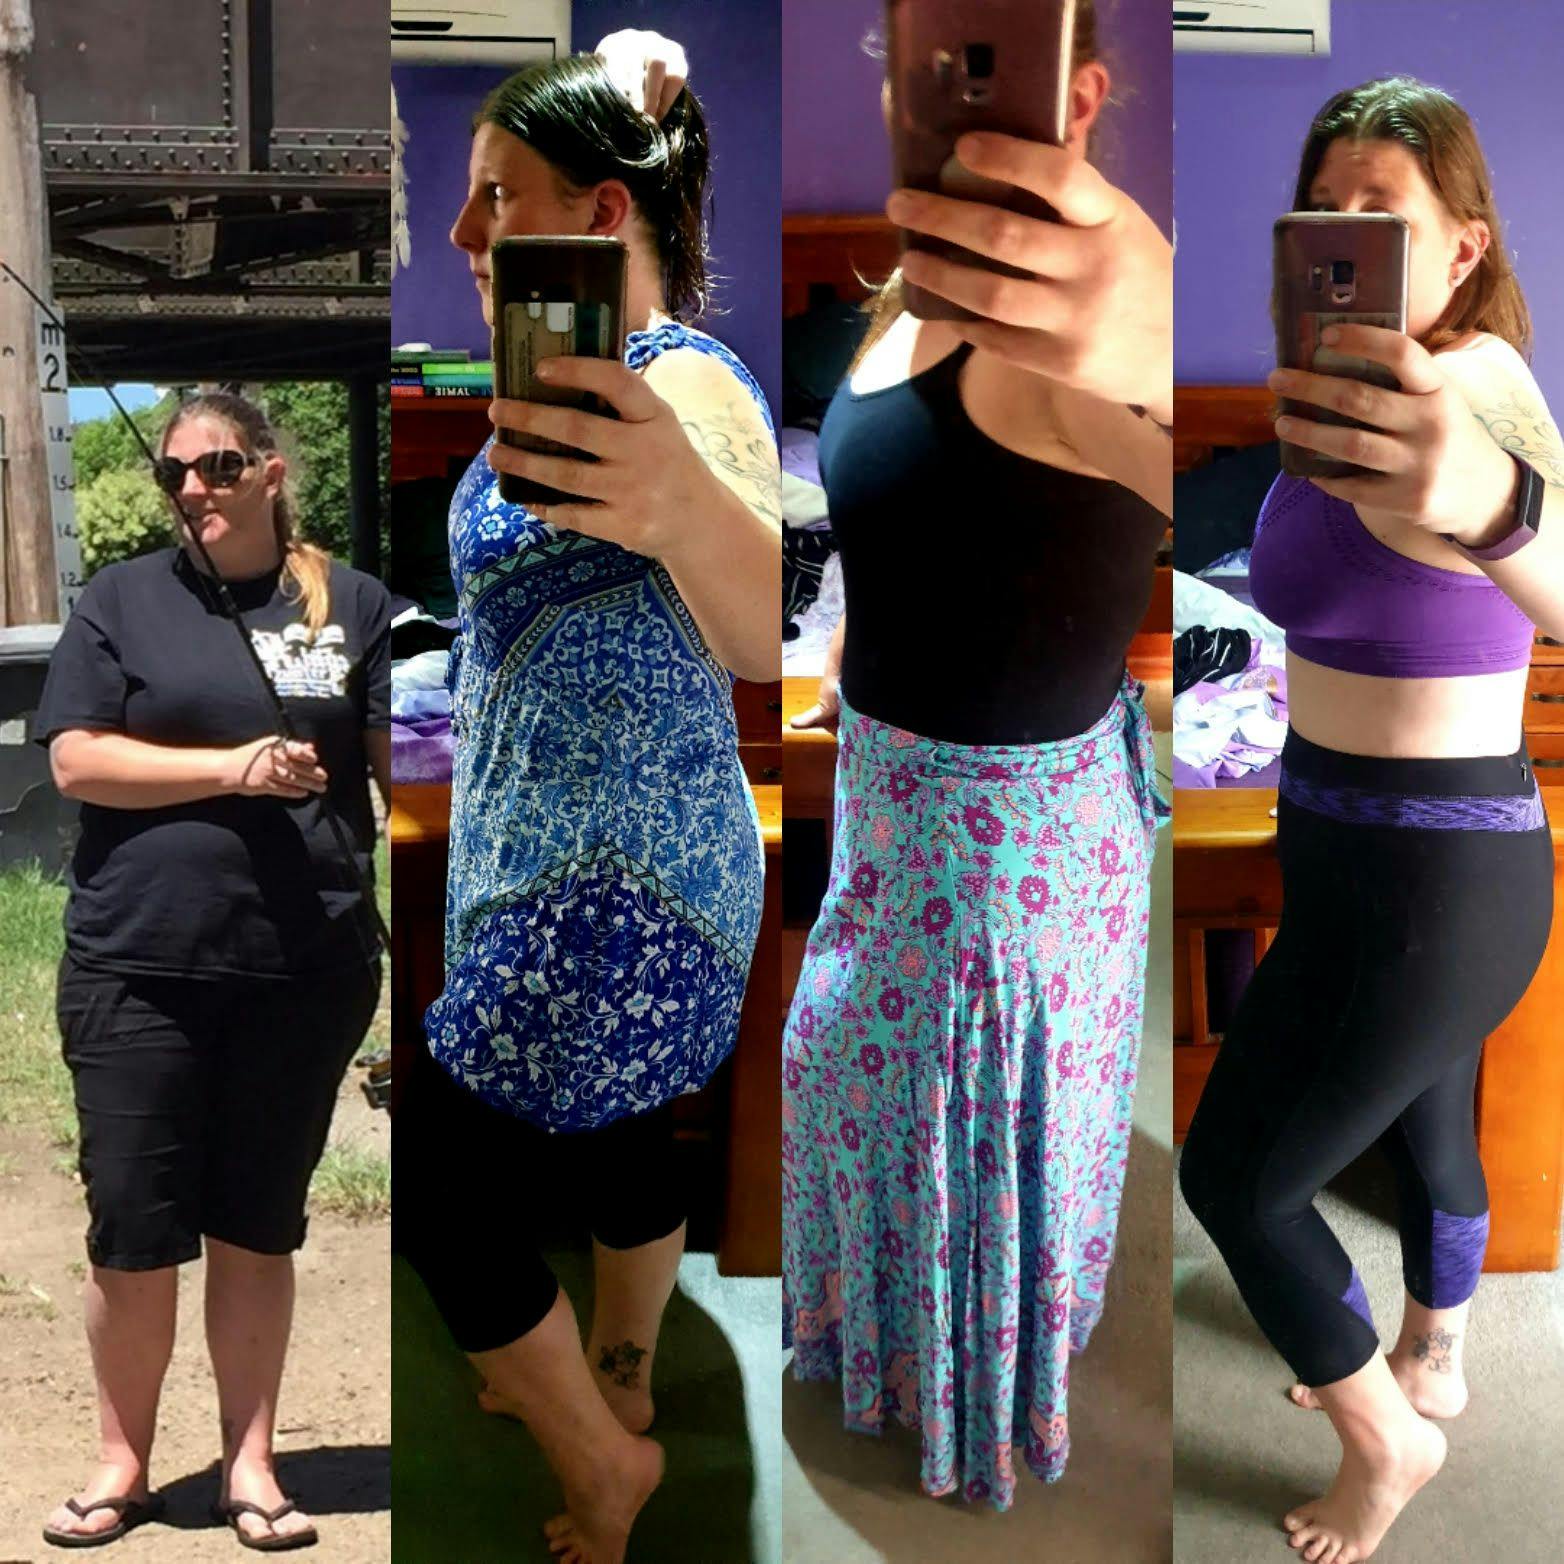 Danelle lost 15kg and found her quality of life!